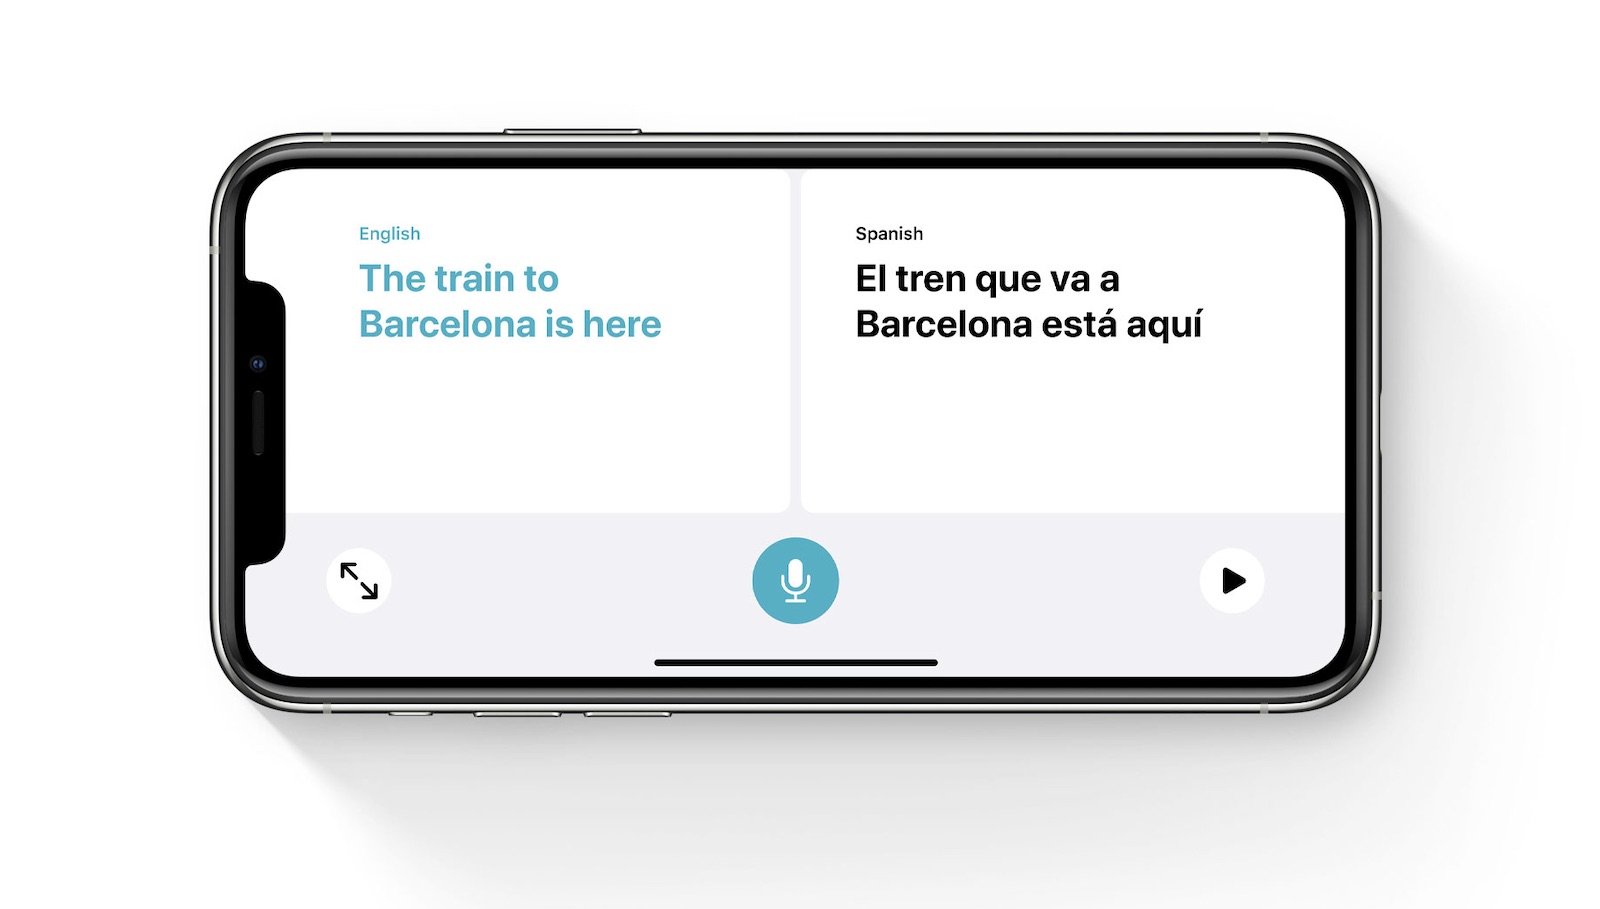 iOS 14 Features New Translate App With Support for 11 Languages ...